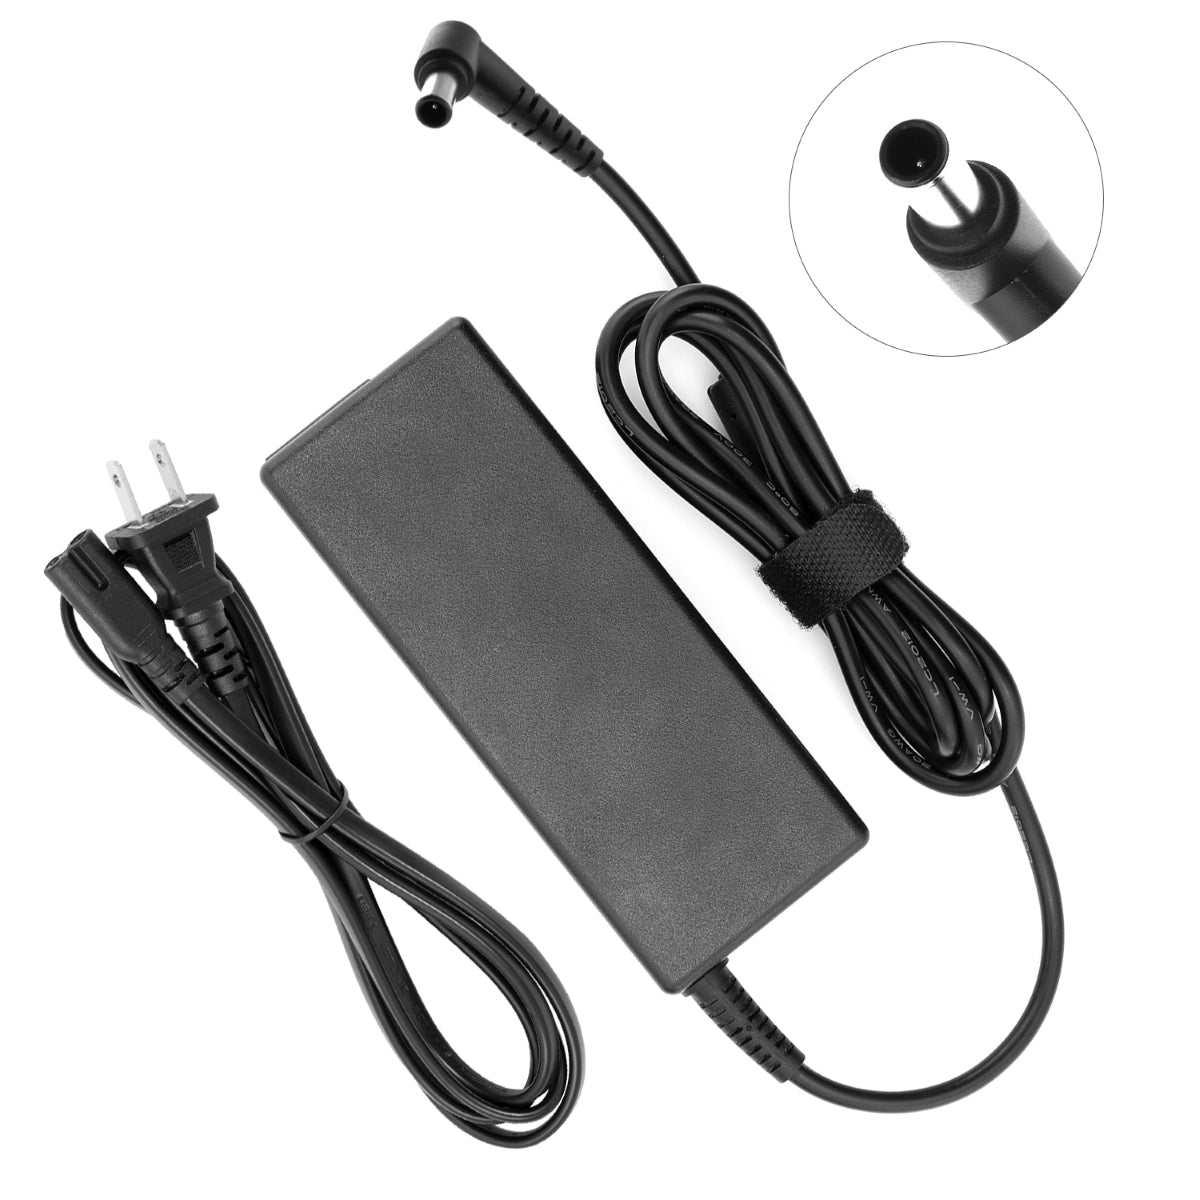 AC Adapter for LG 19EN33SW Monitor